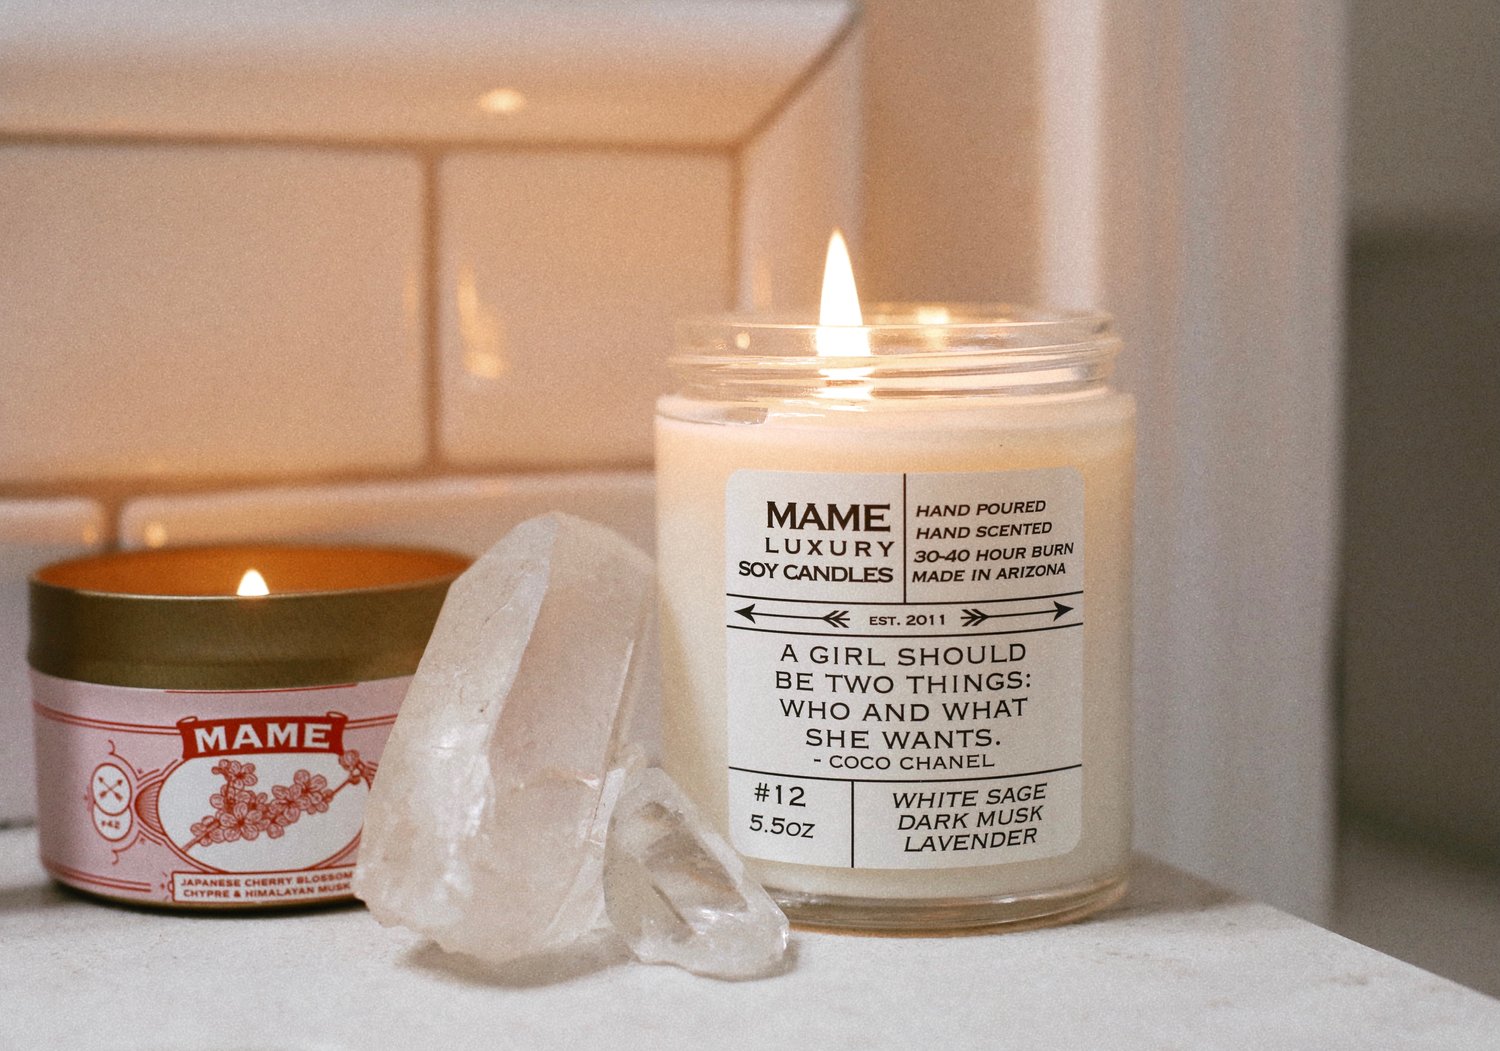 12 - White Sage, Dark Musk,Lavender — MAME Soy Candles